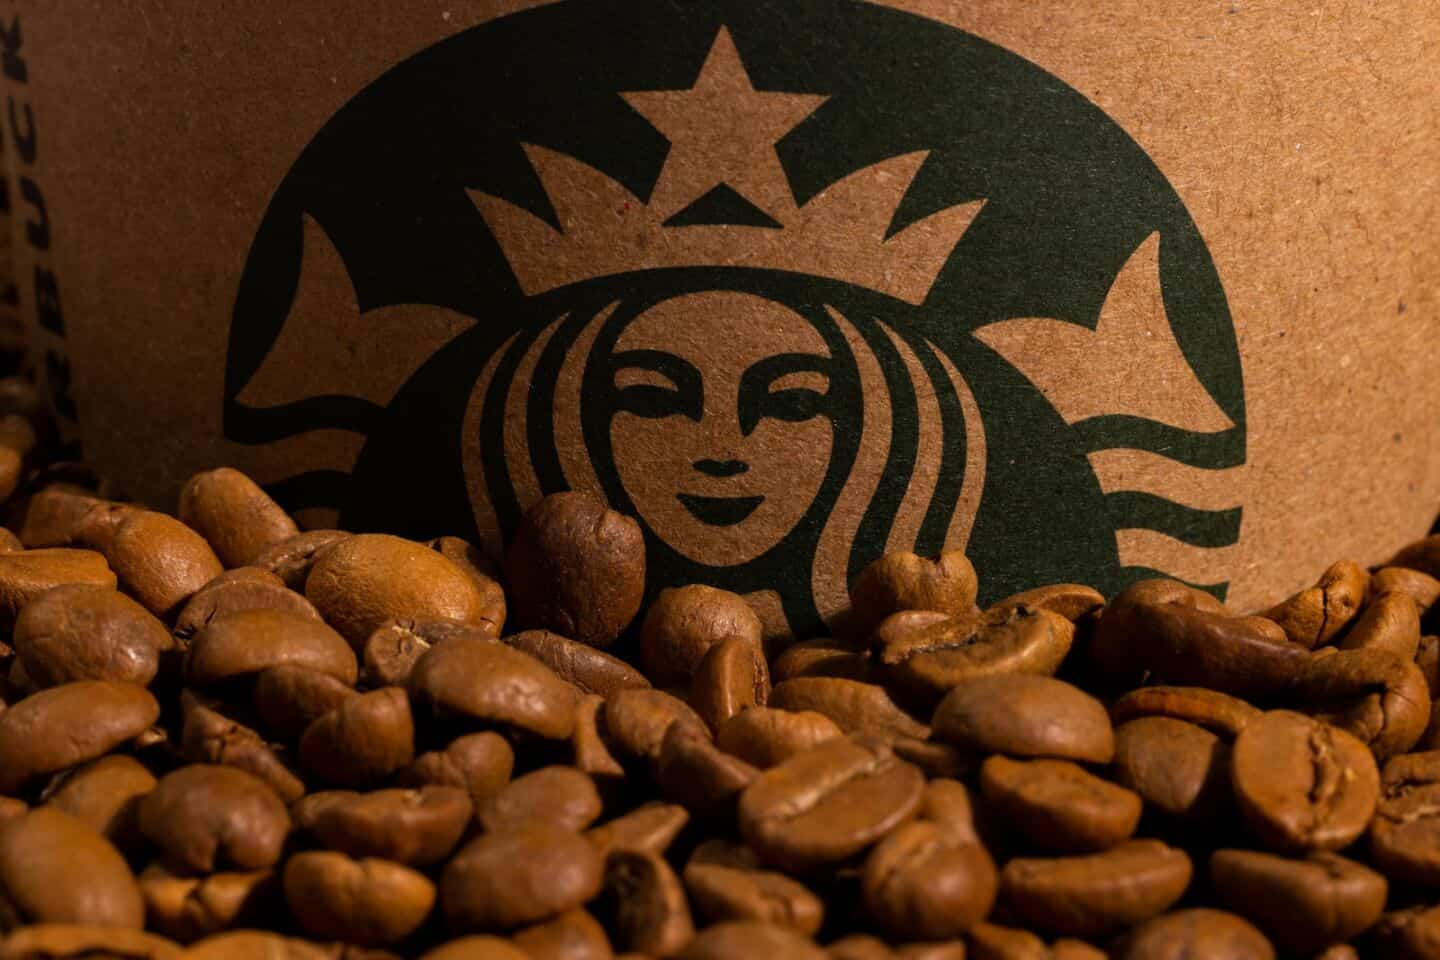 a starbucks cup surrounded by roasted coffee beans